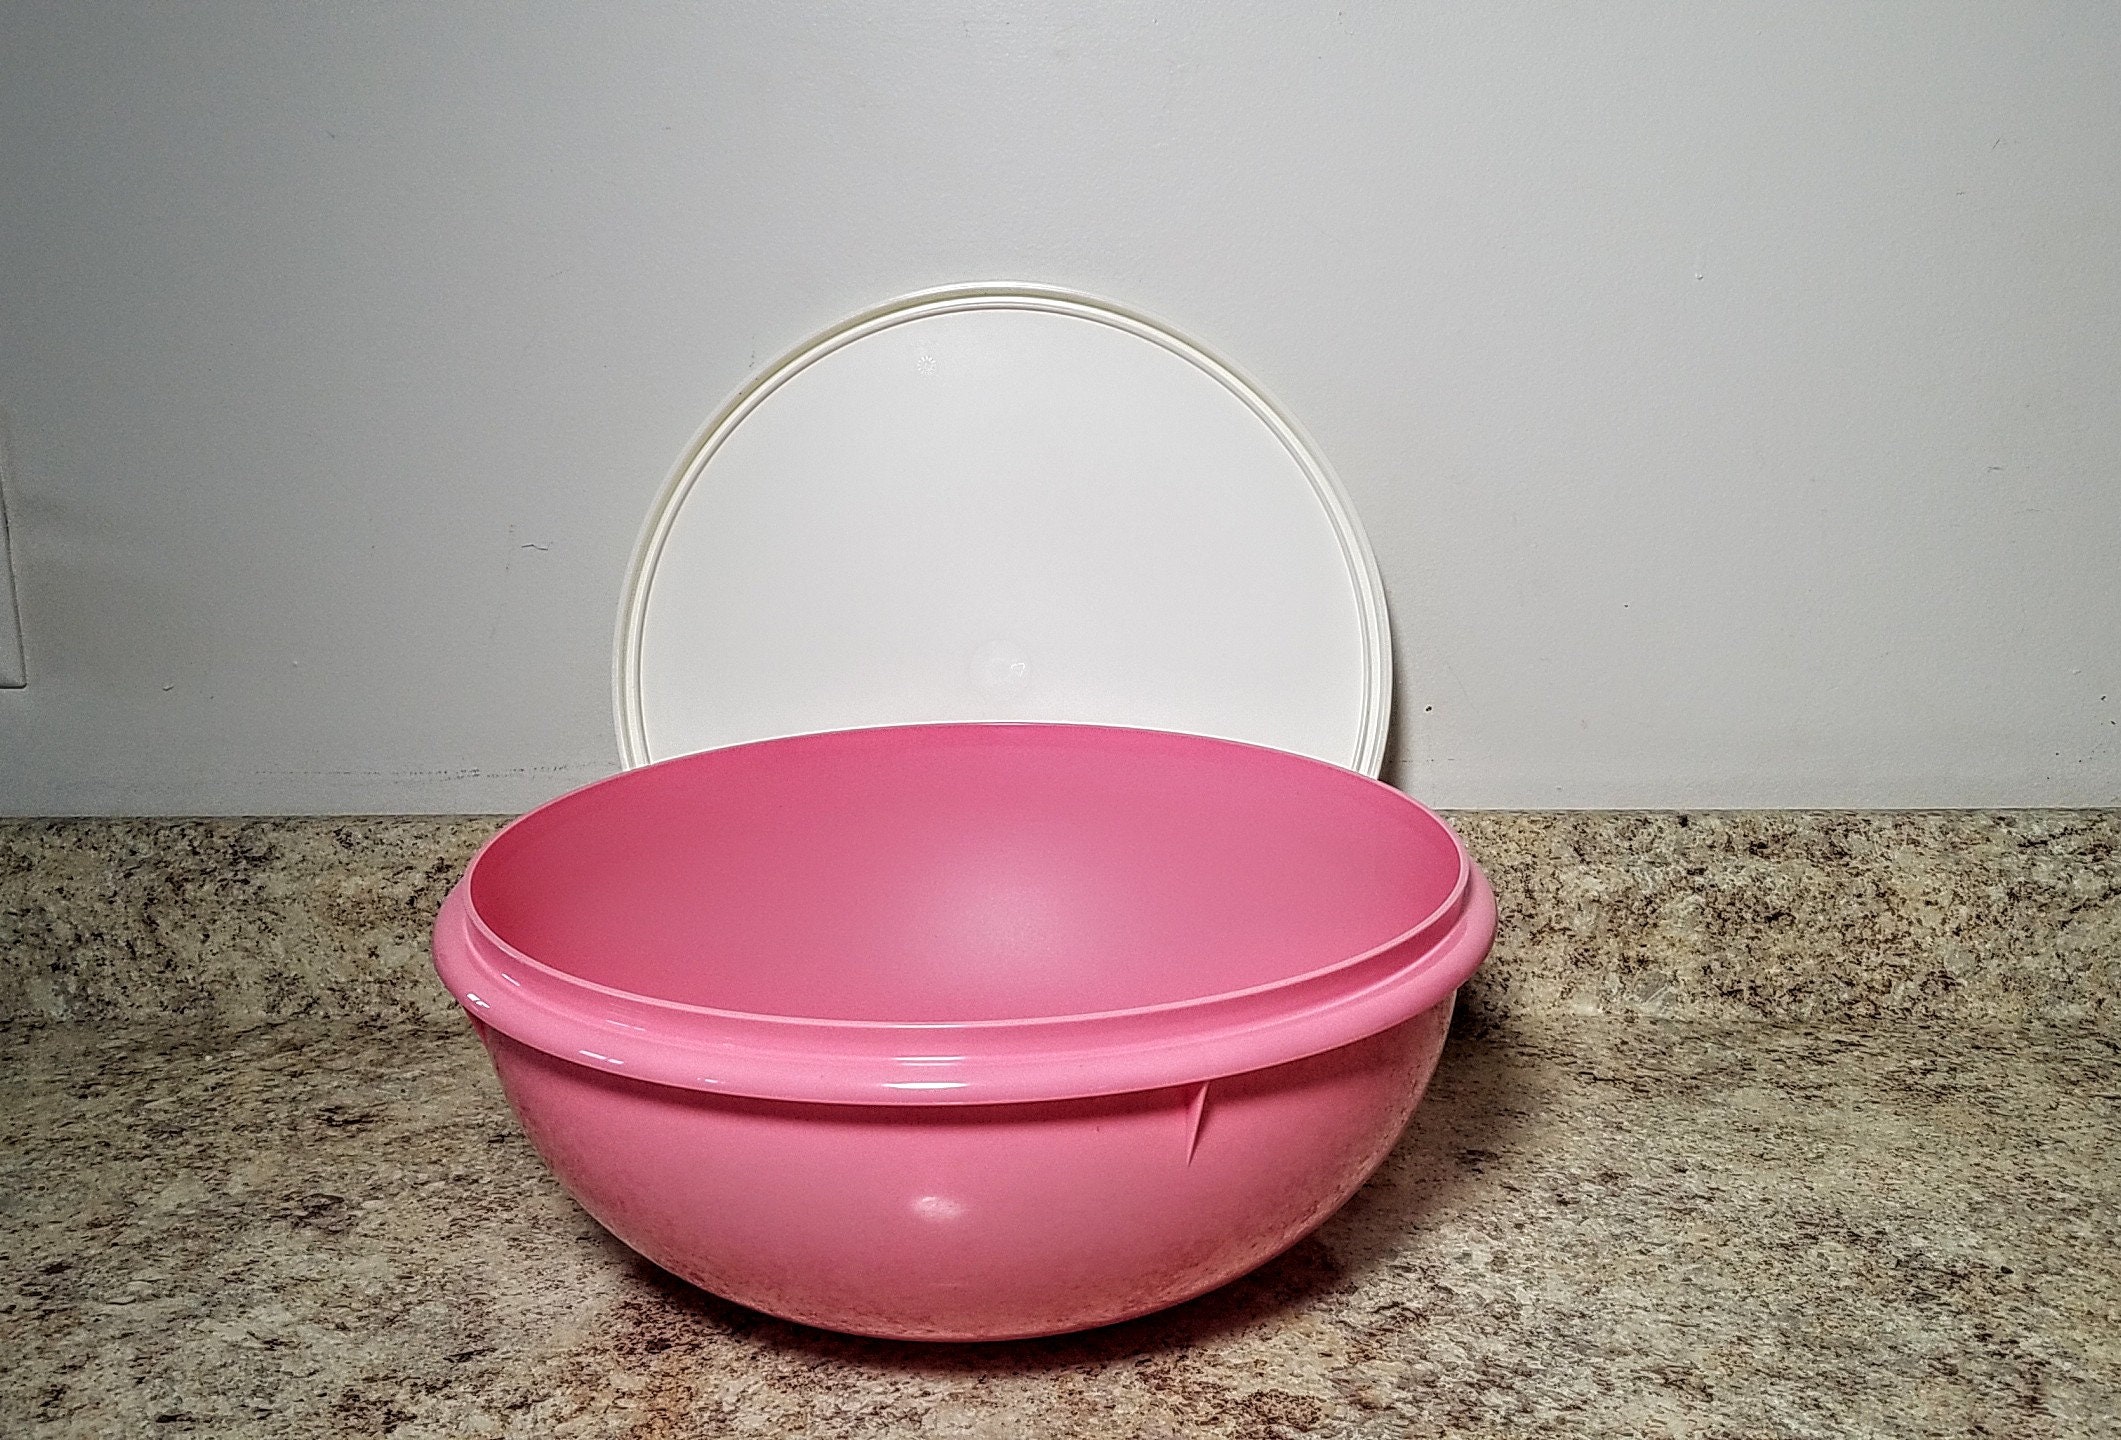 New TUPPERWARE Large 12 Cup Sheer Mixing Bowl #272 with Red Lid